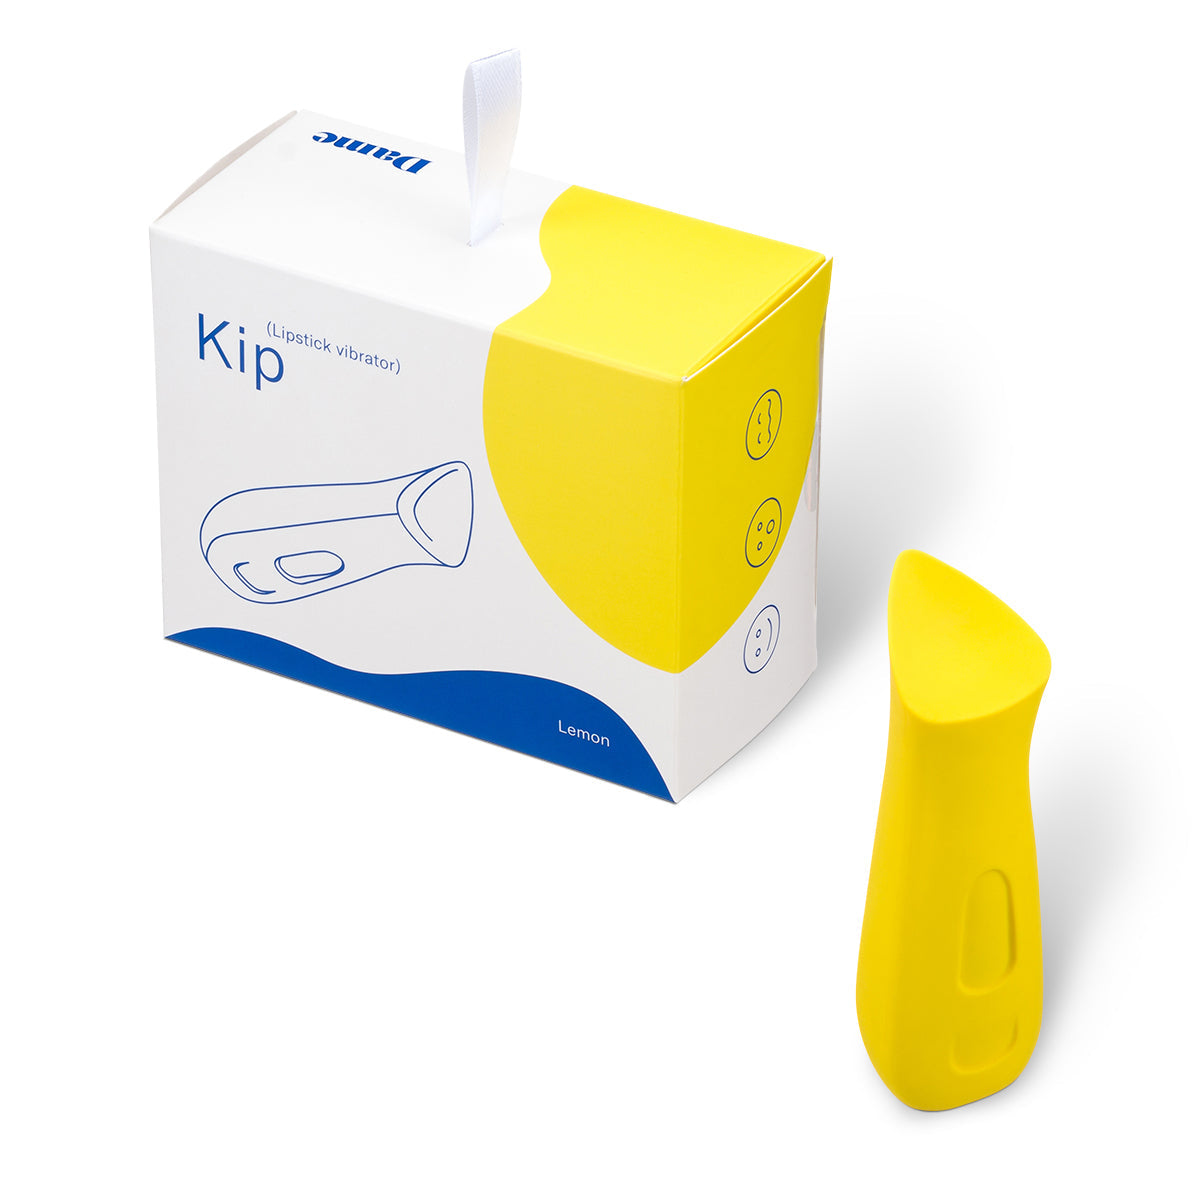 Kip Waterproof Rechargeable Lipstick Vibrator by Dame - Yellow with the box